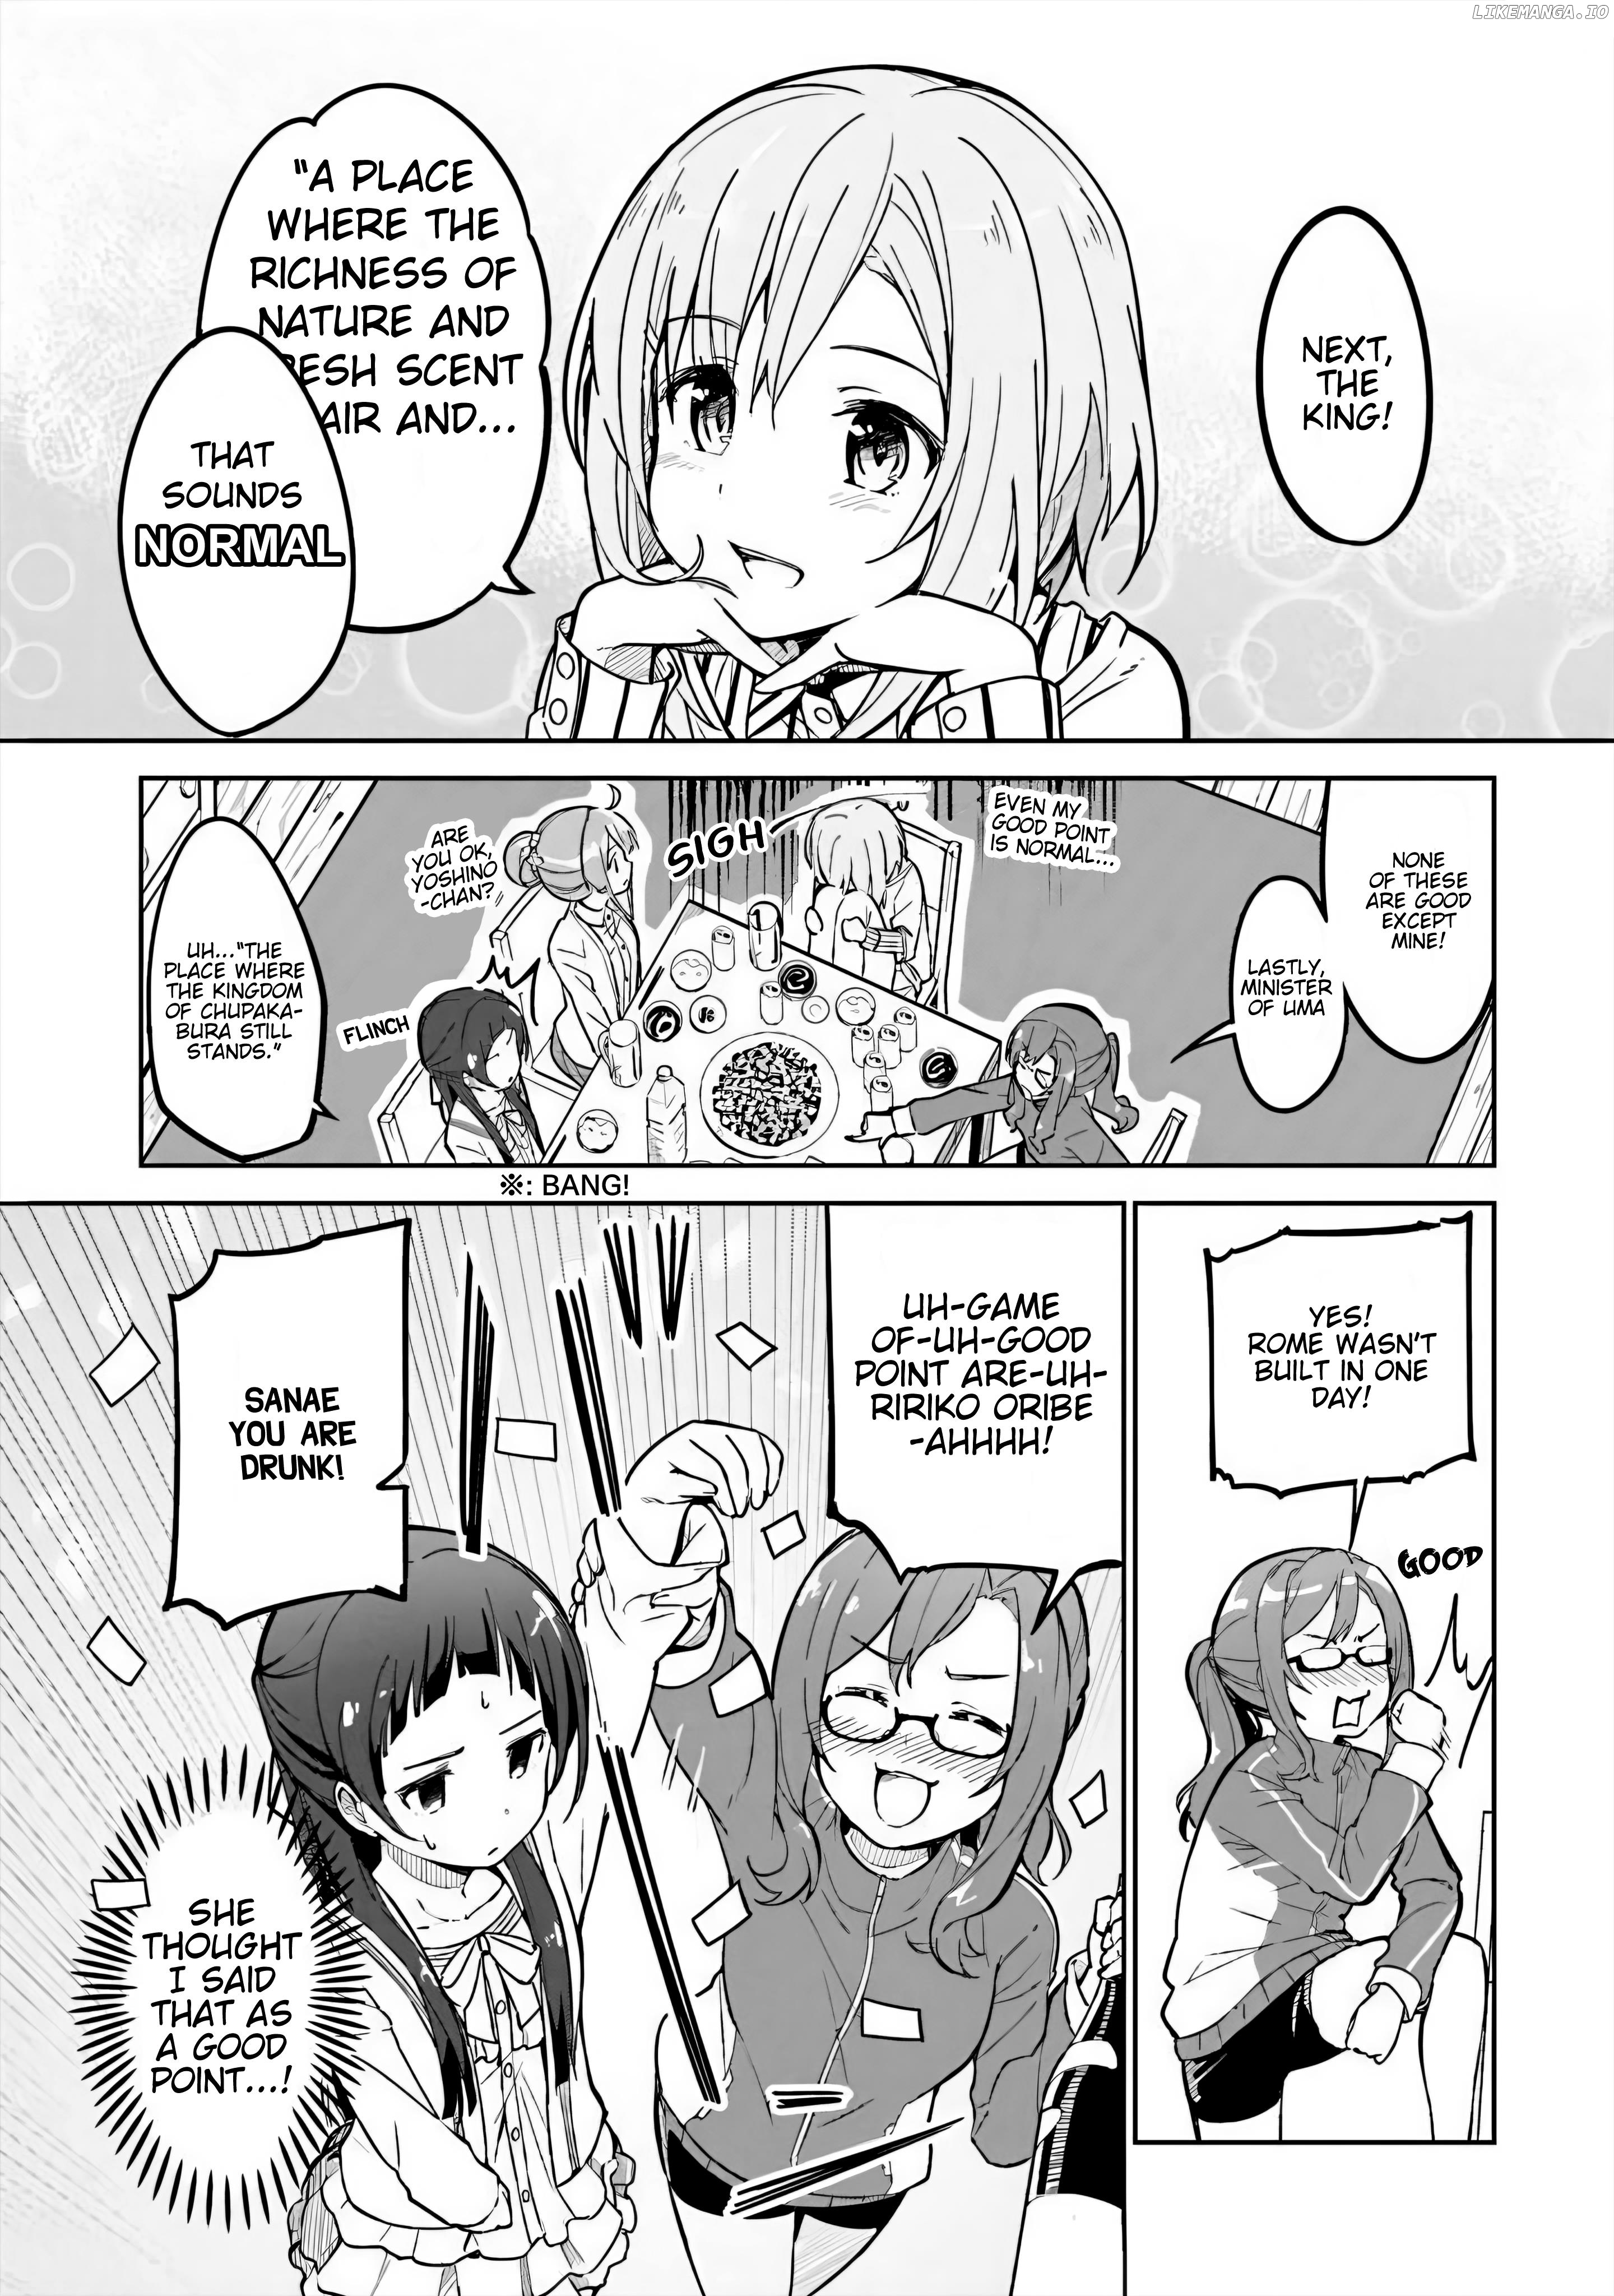 Sakura Quest Side Story: Ririko Oribe's Daily Report Vol 1 chapter 3 - page 7